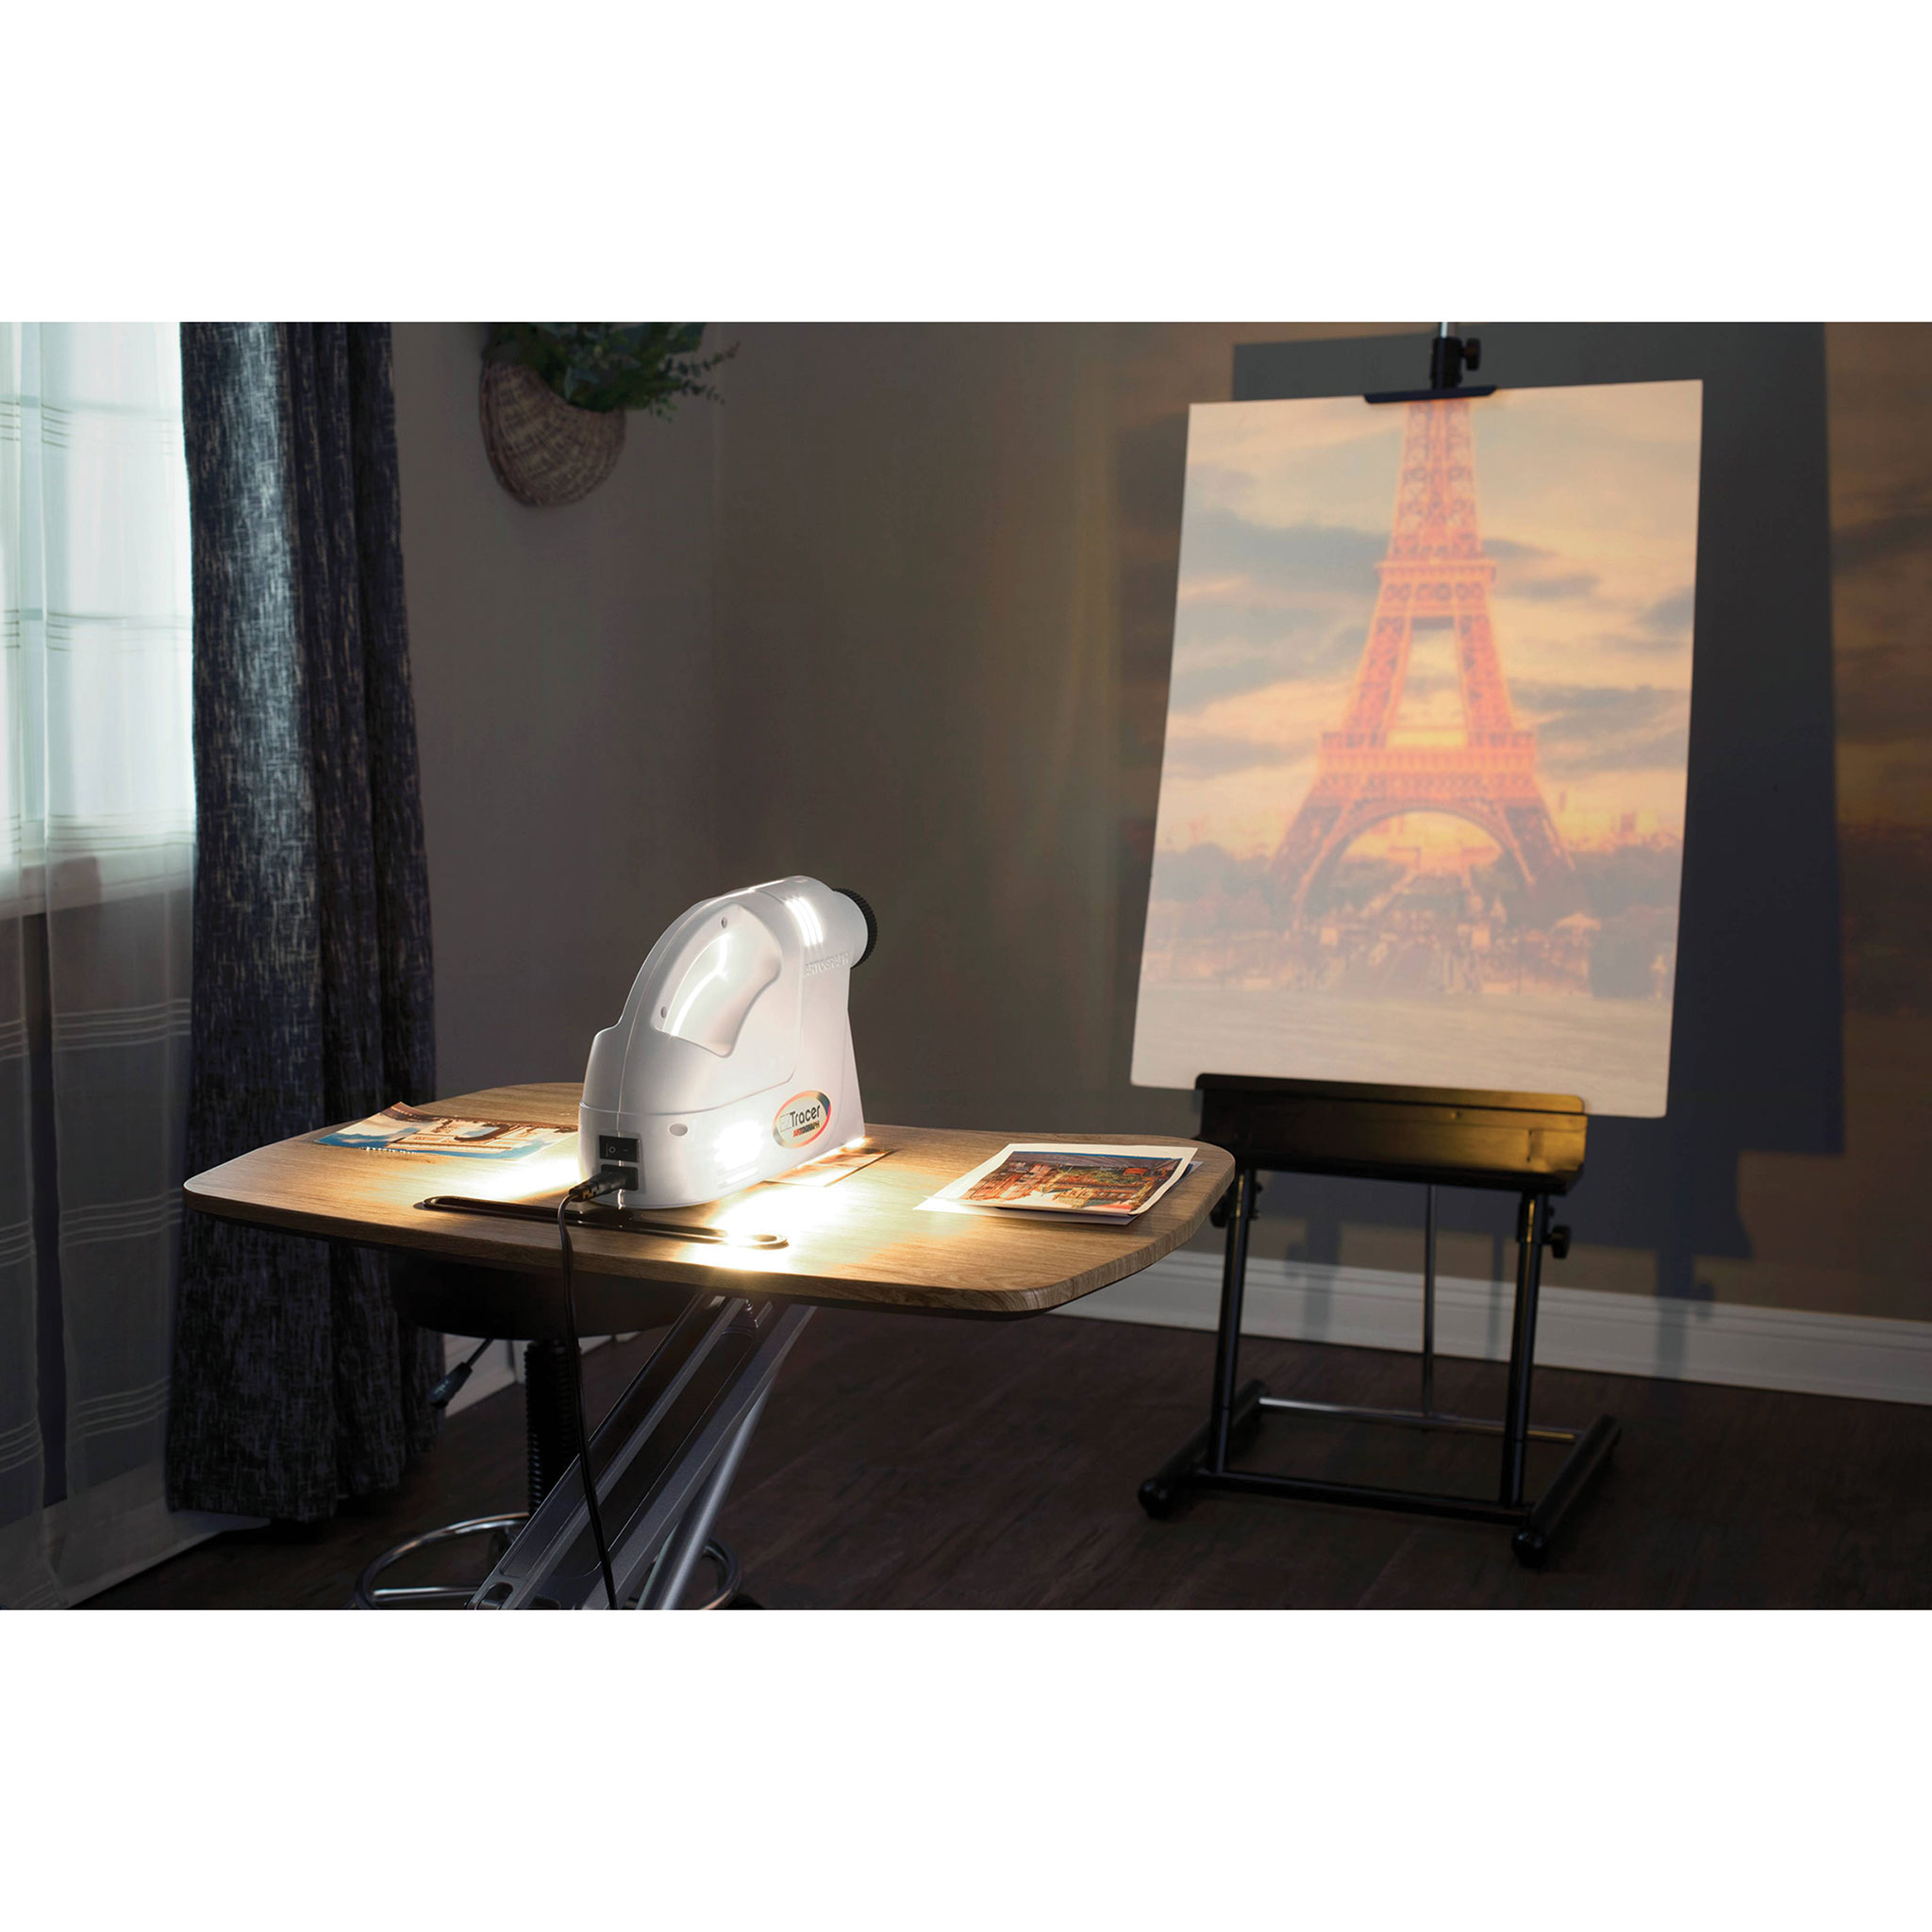 ARTOGRAPH EZ Tracer Opaque Non-Digital Art Projector for Image  Reproduction- Bulb Not Included 25550 - The Home Depot